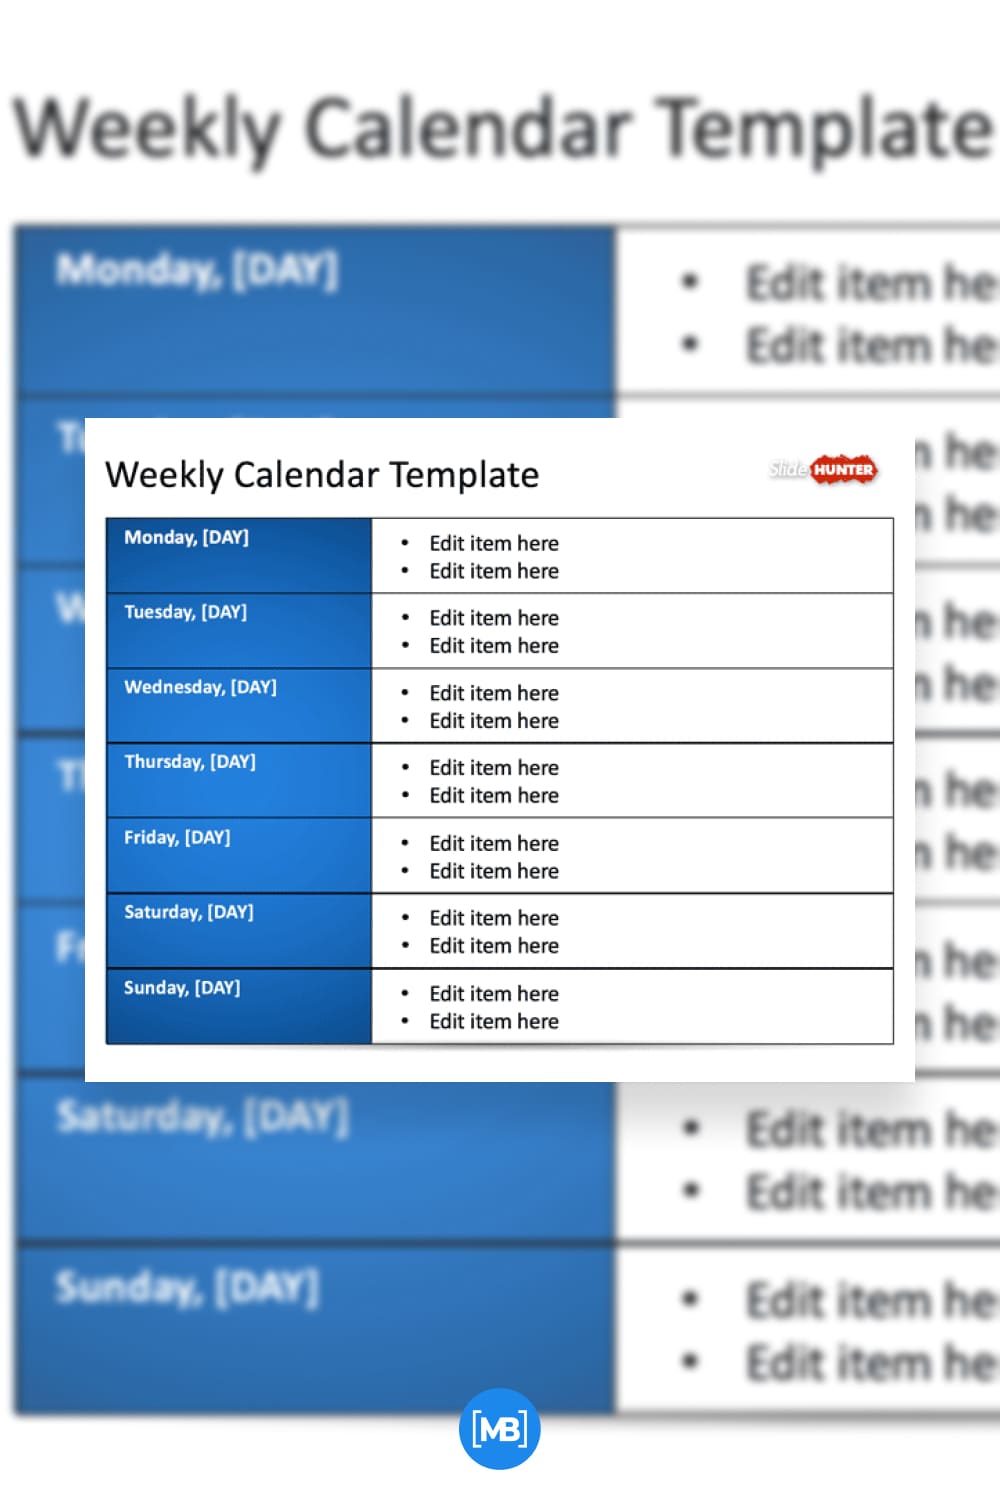 Weekly blank calendar template for powerpoint.